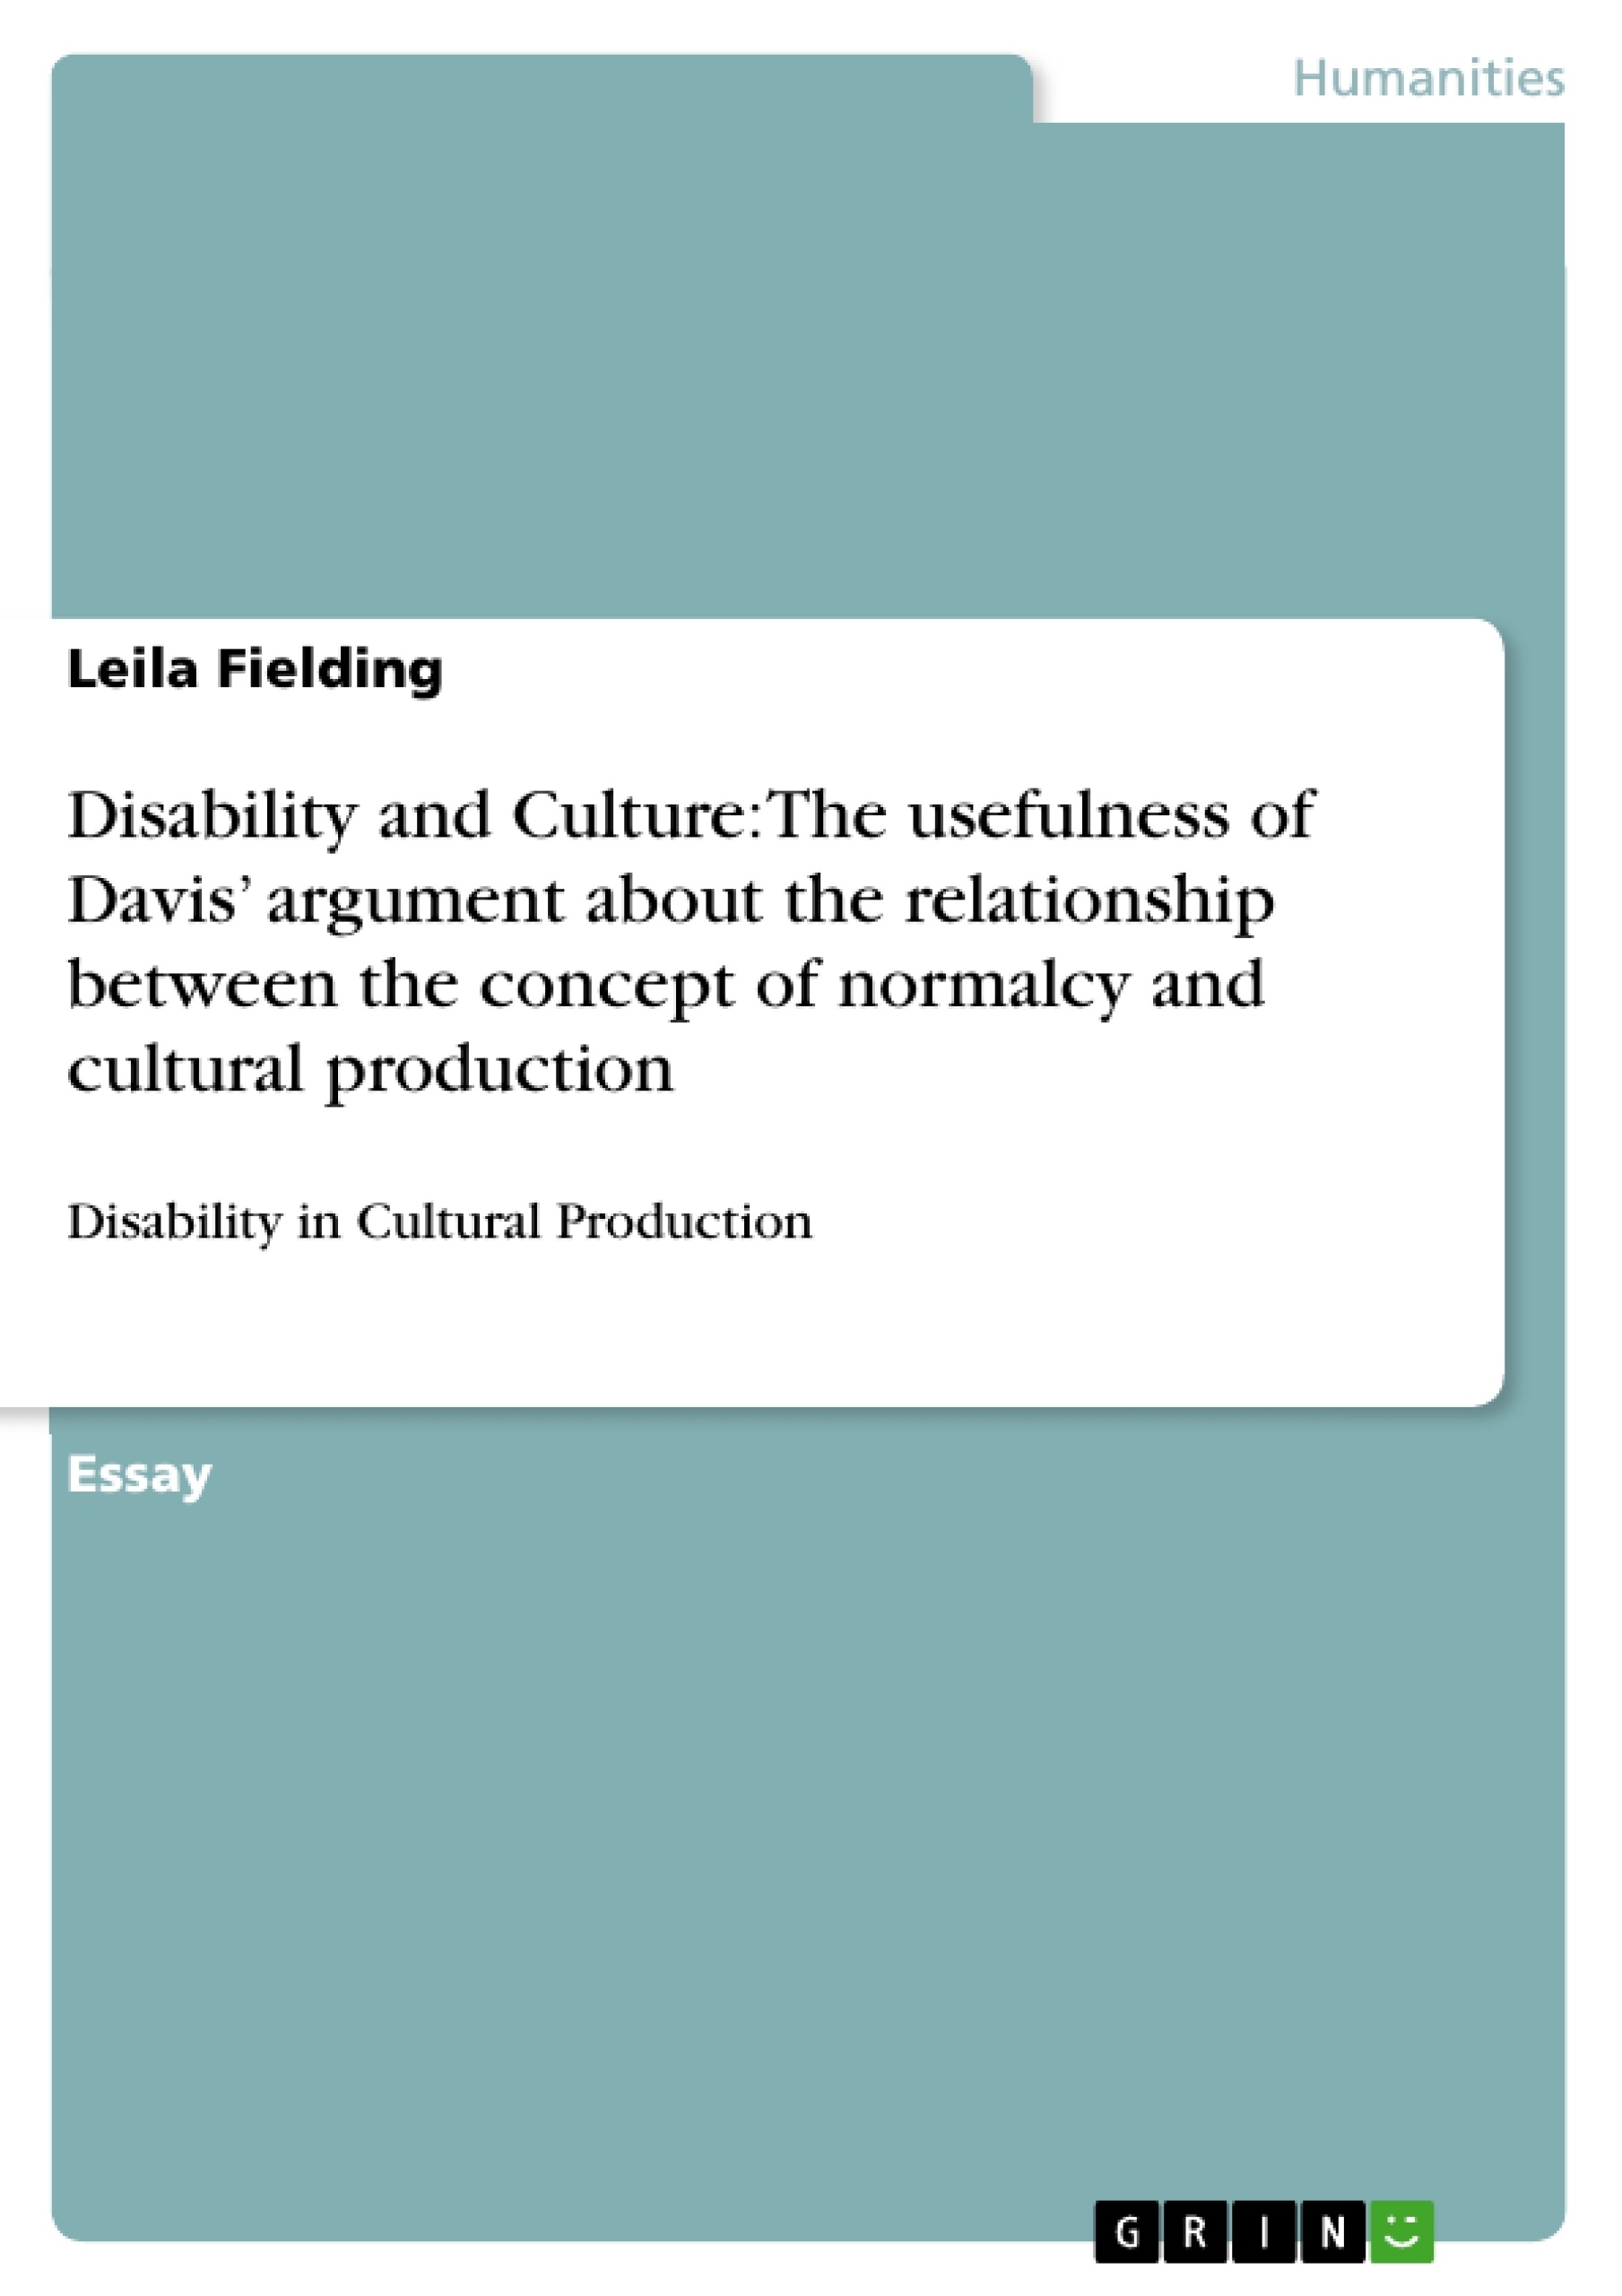 Título: Disability and Culture: The usefulness of Davis’ argument about the relationship between the concept of normalcy and cultural production